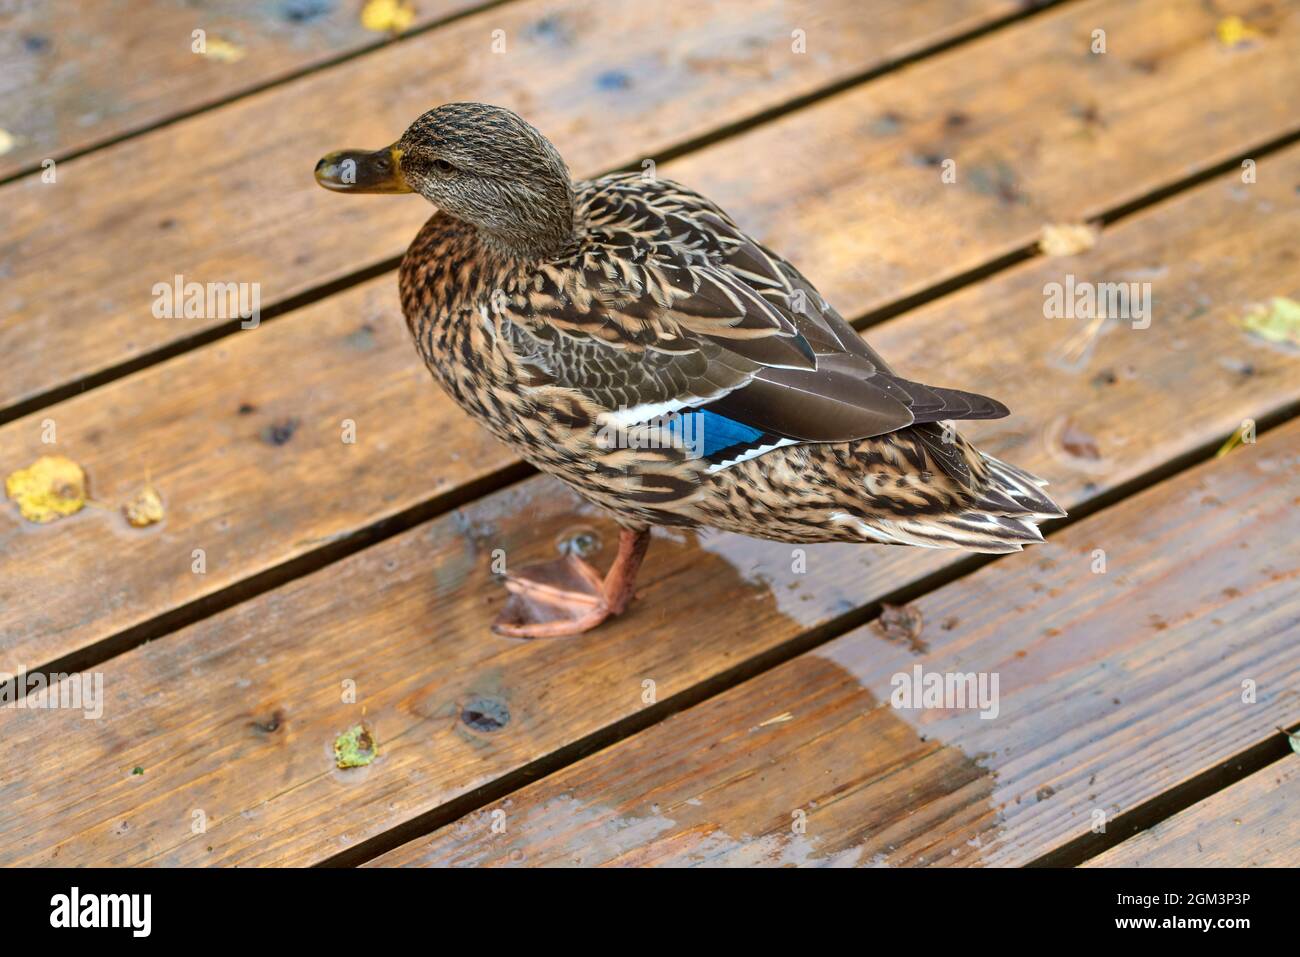 wild duck with blue feathers called a speculum on her wings Stock Photo